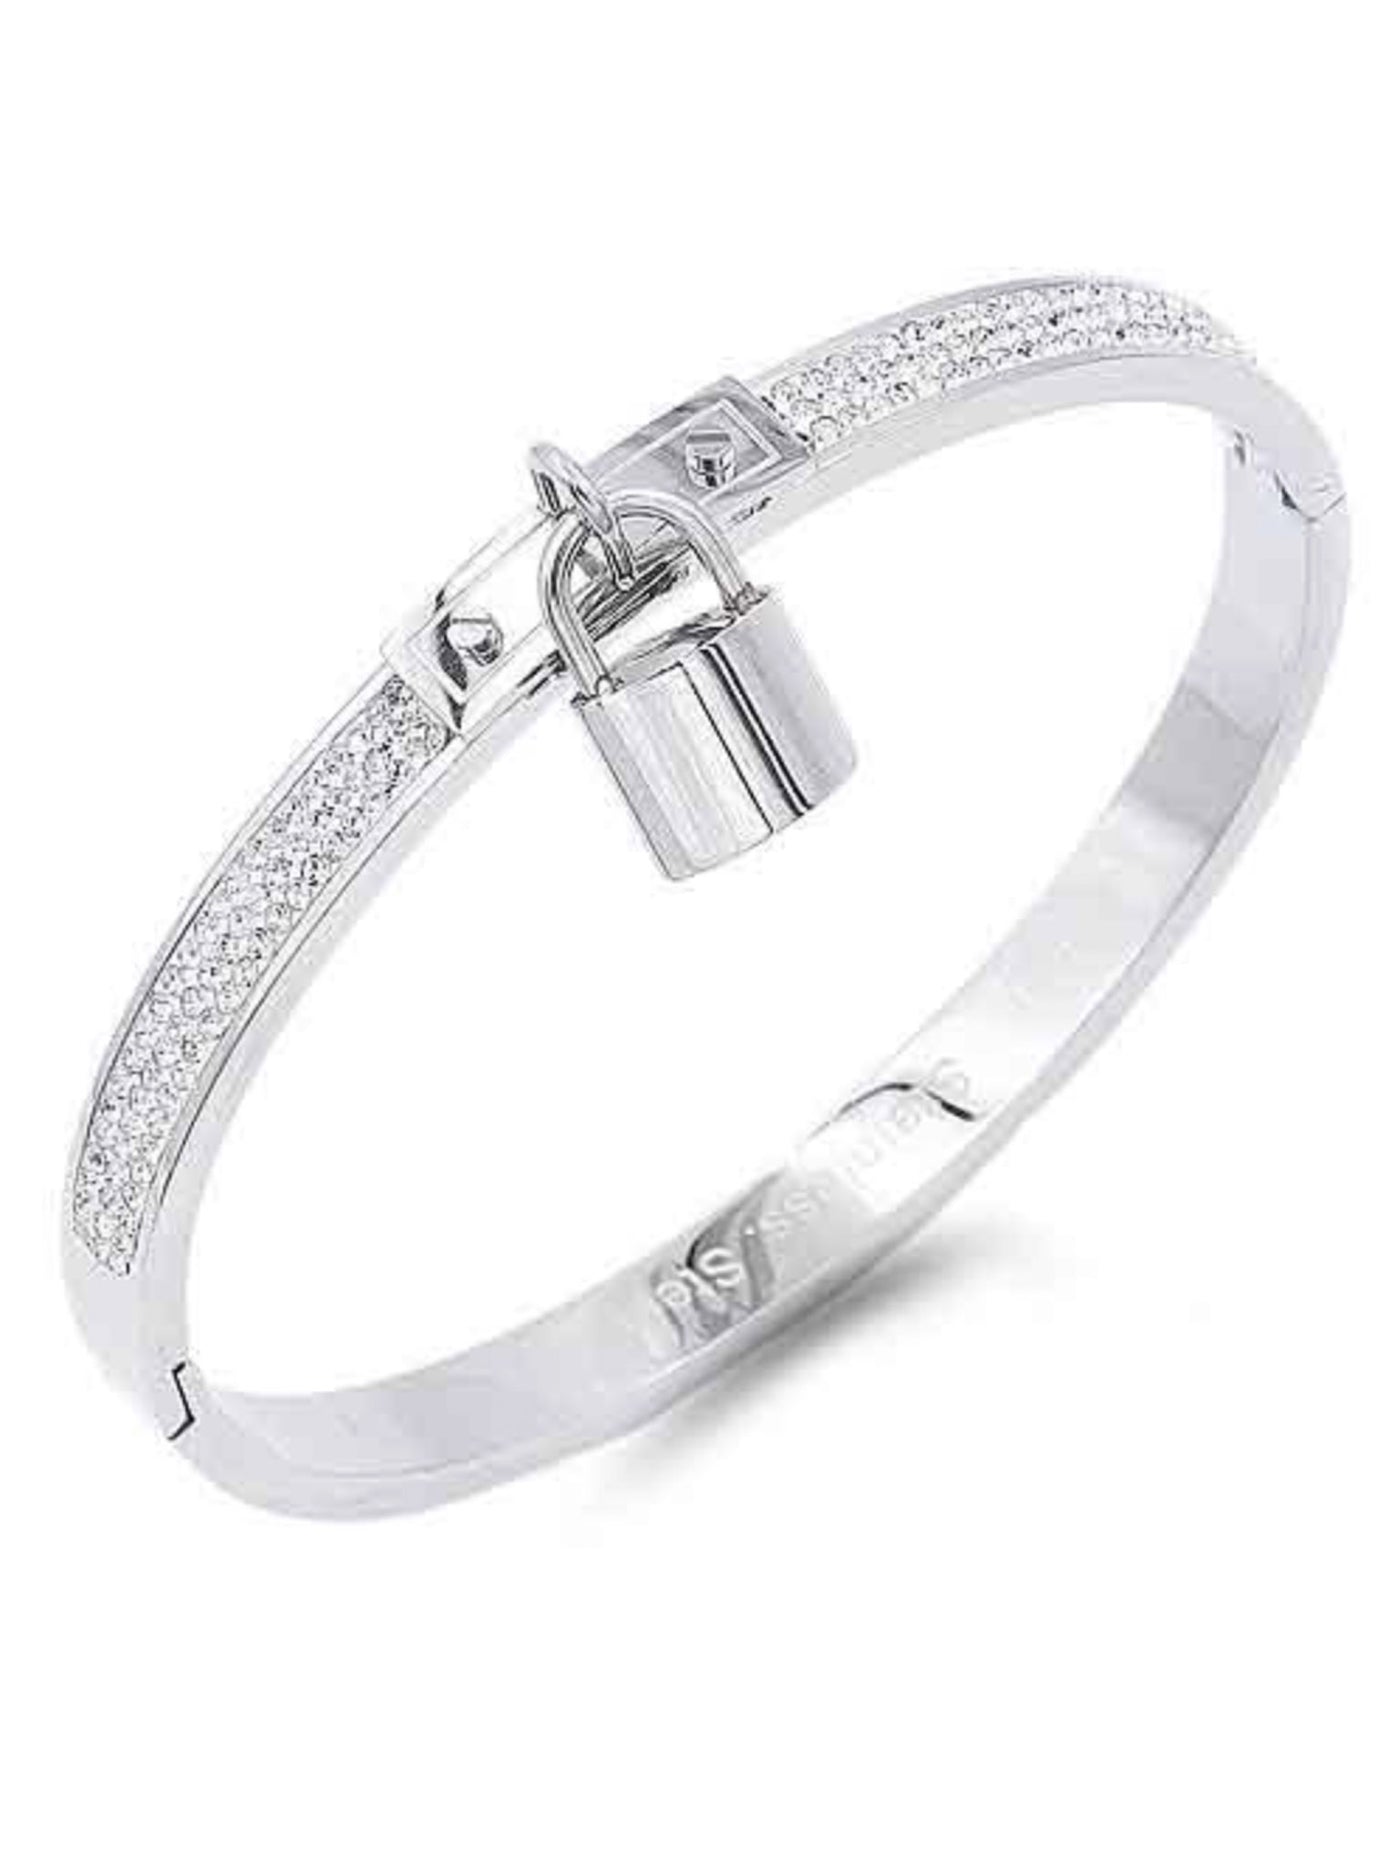 Gold Plated Stainless Steel CZ Stone Bangle Bracelet with Lock